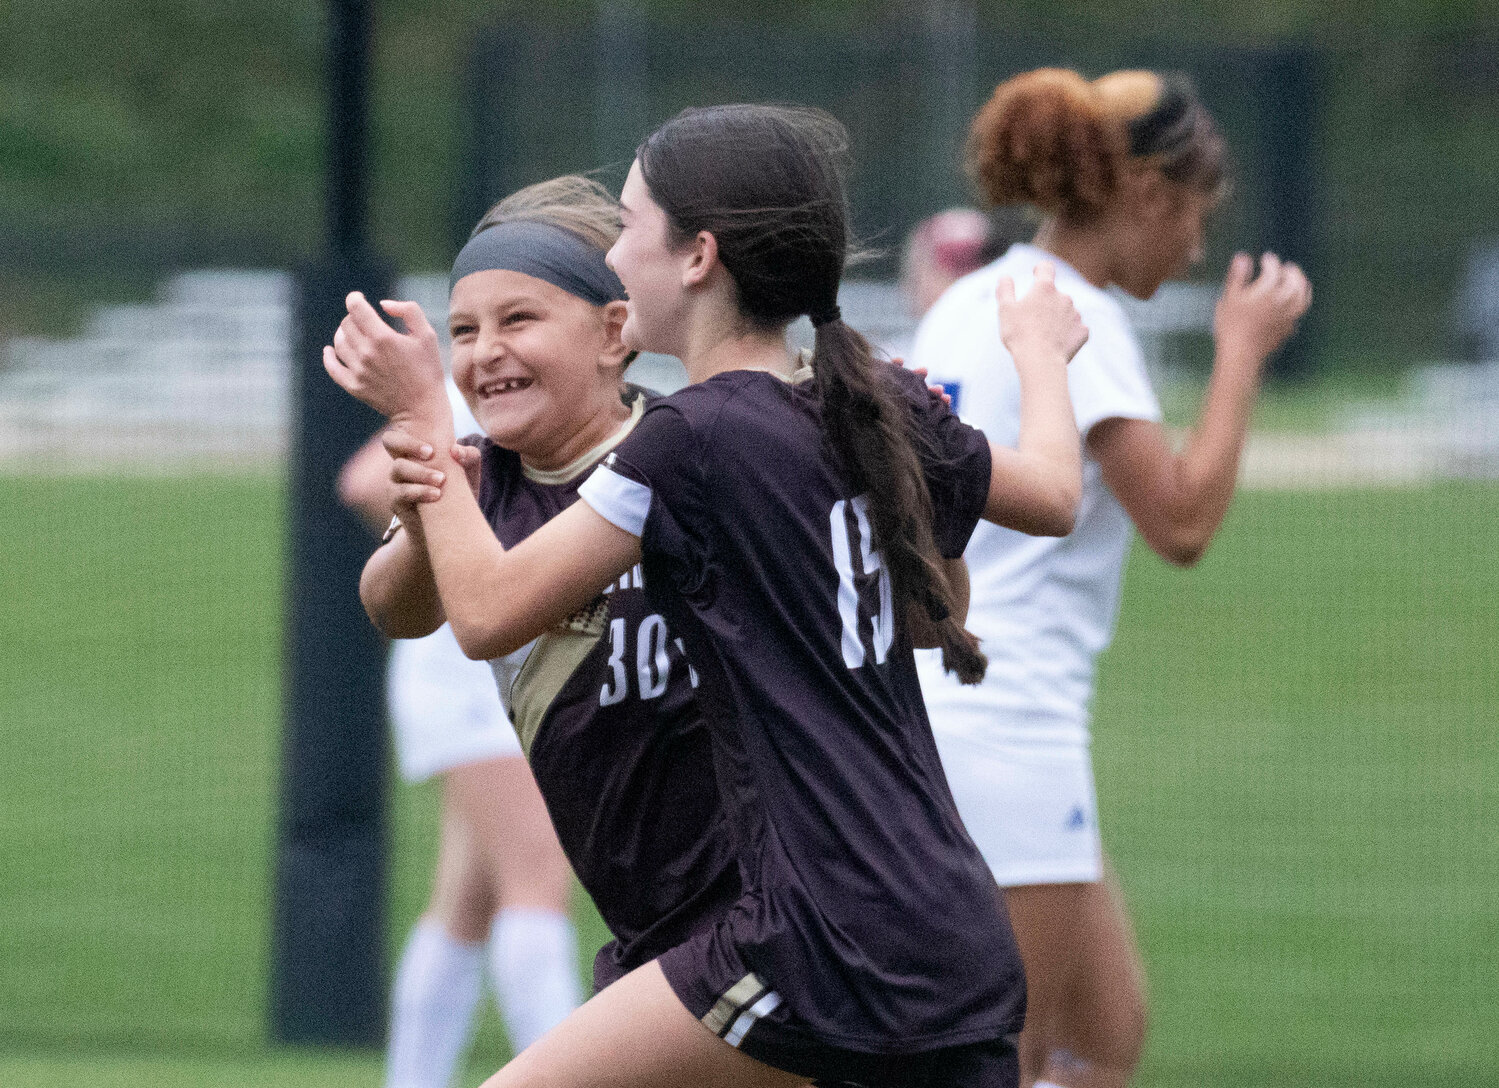 Harper Thibodeau (left) and Sophia Nickelson celebrate after Nickelson scored her second goal of the game.